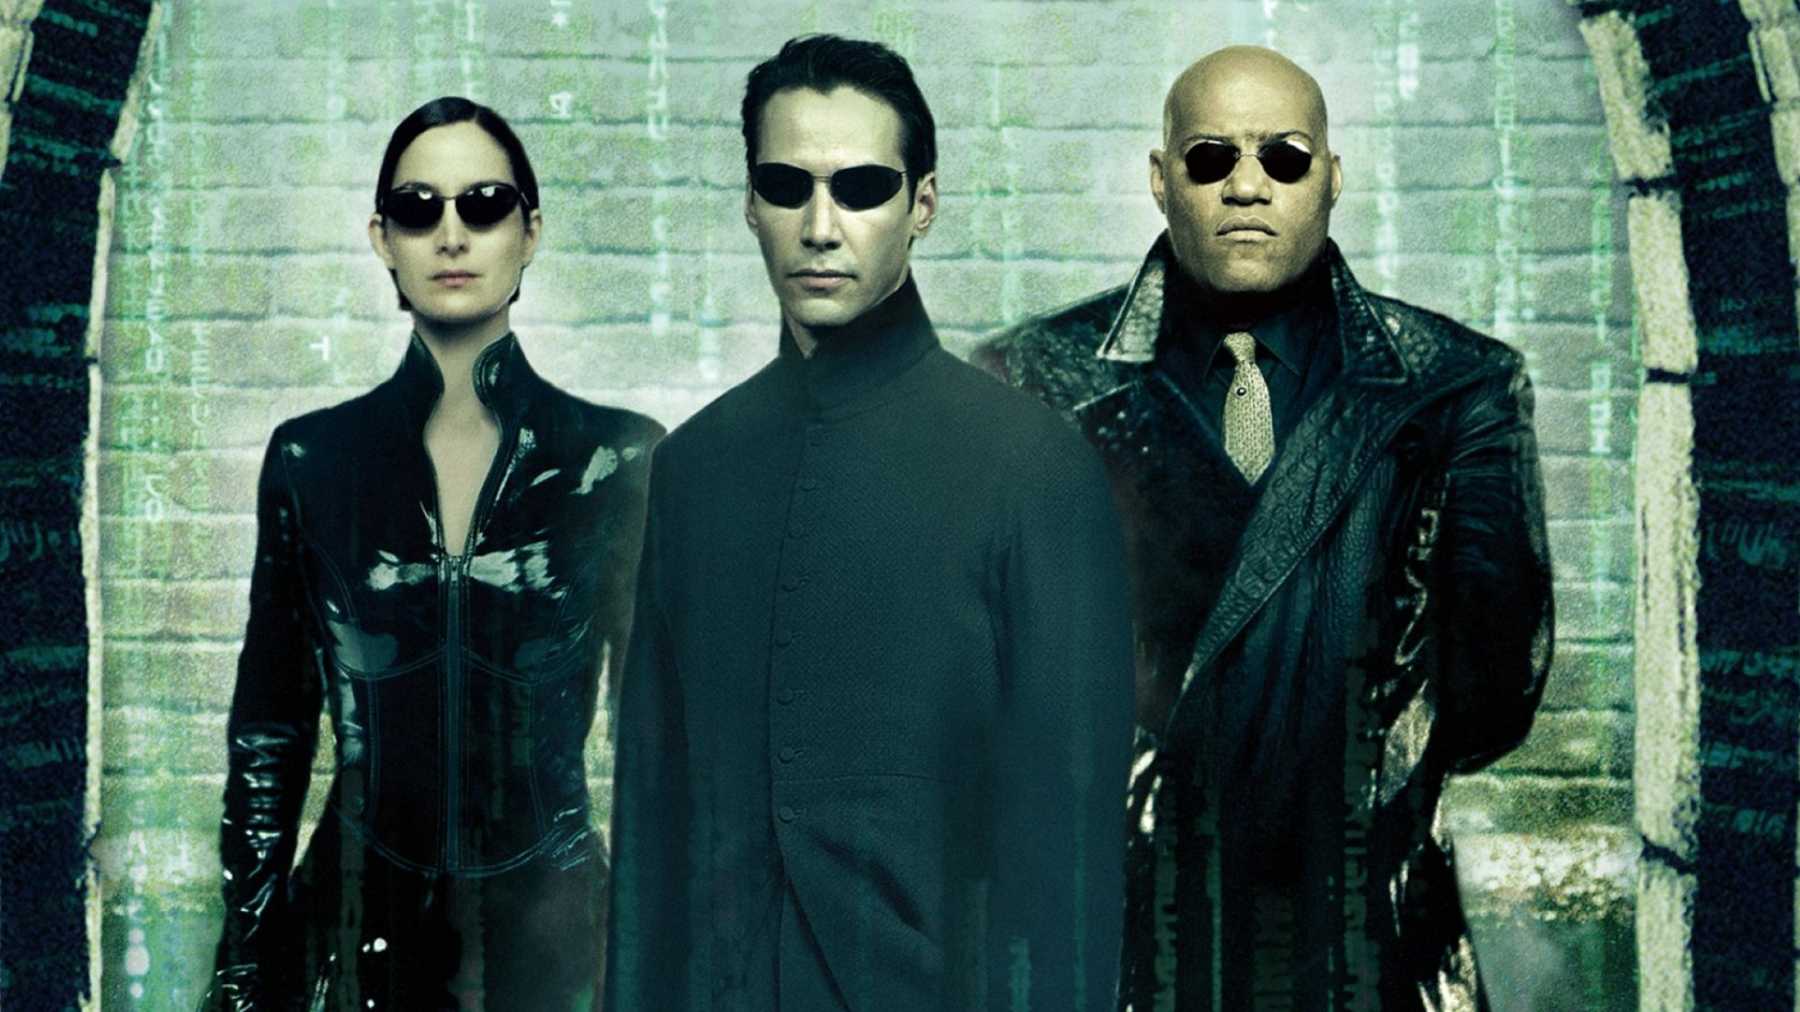 “Matrix 4” Is In Development, with Keanu Reeves, & Carrie-Anne Moss returning as Neo, & Trinity, Lana Wachowski will write & direct.